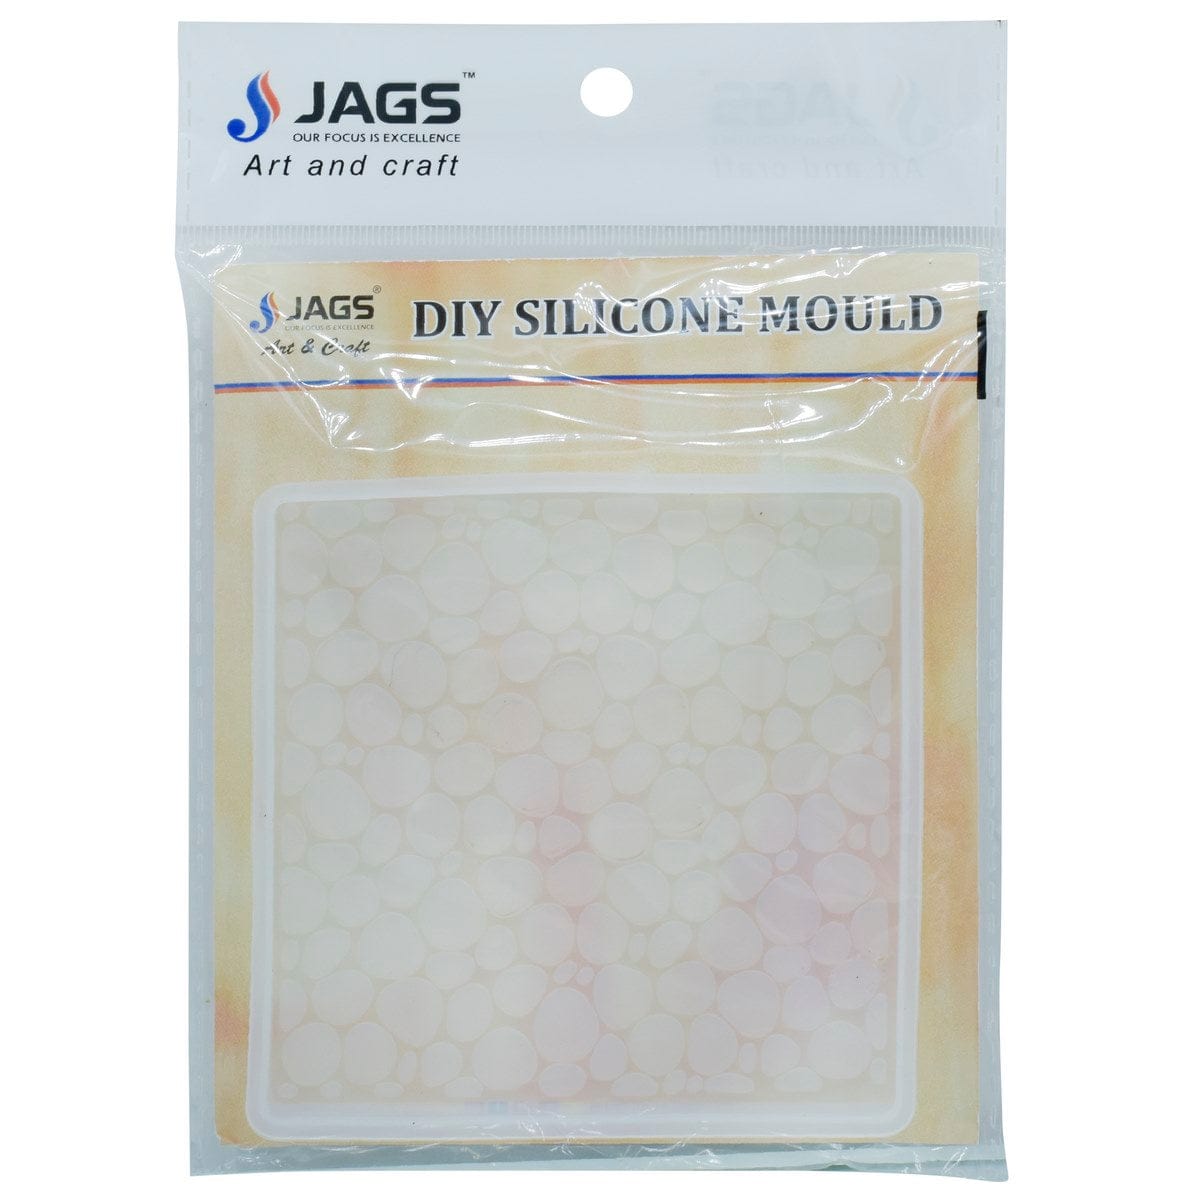 jags-mumbai Mould Silicone Mould Square Honey Comb 4X4 SMSH00